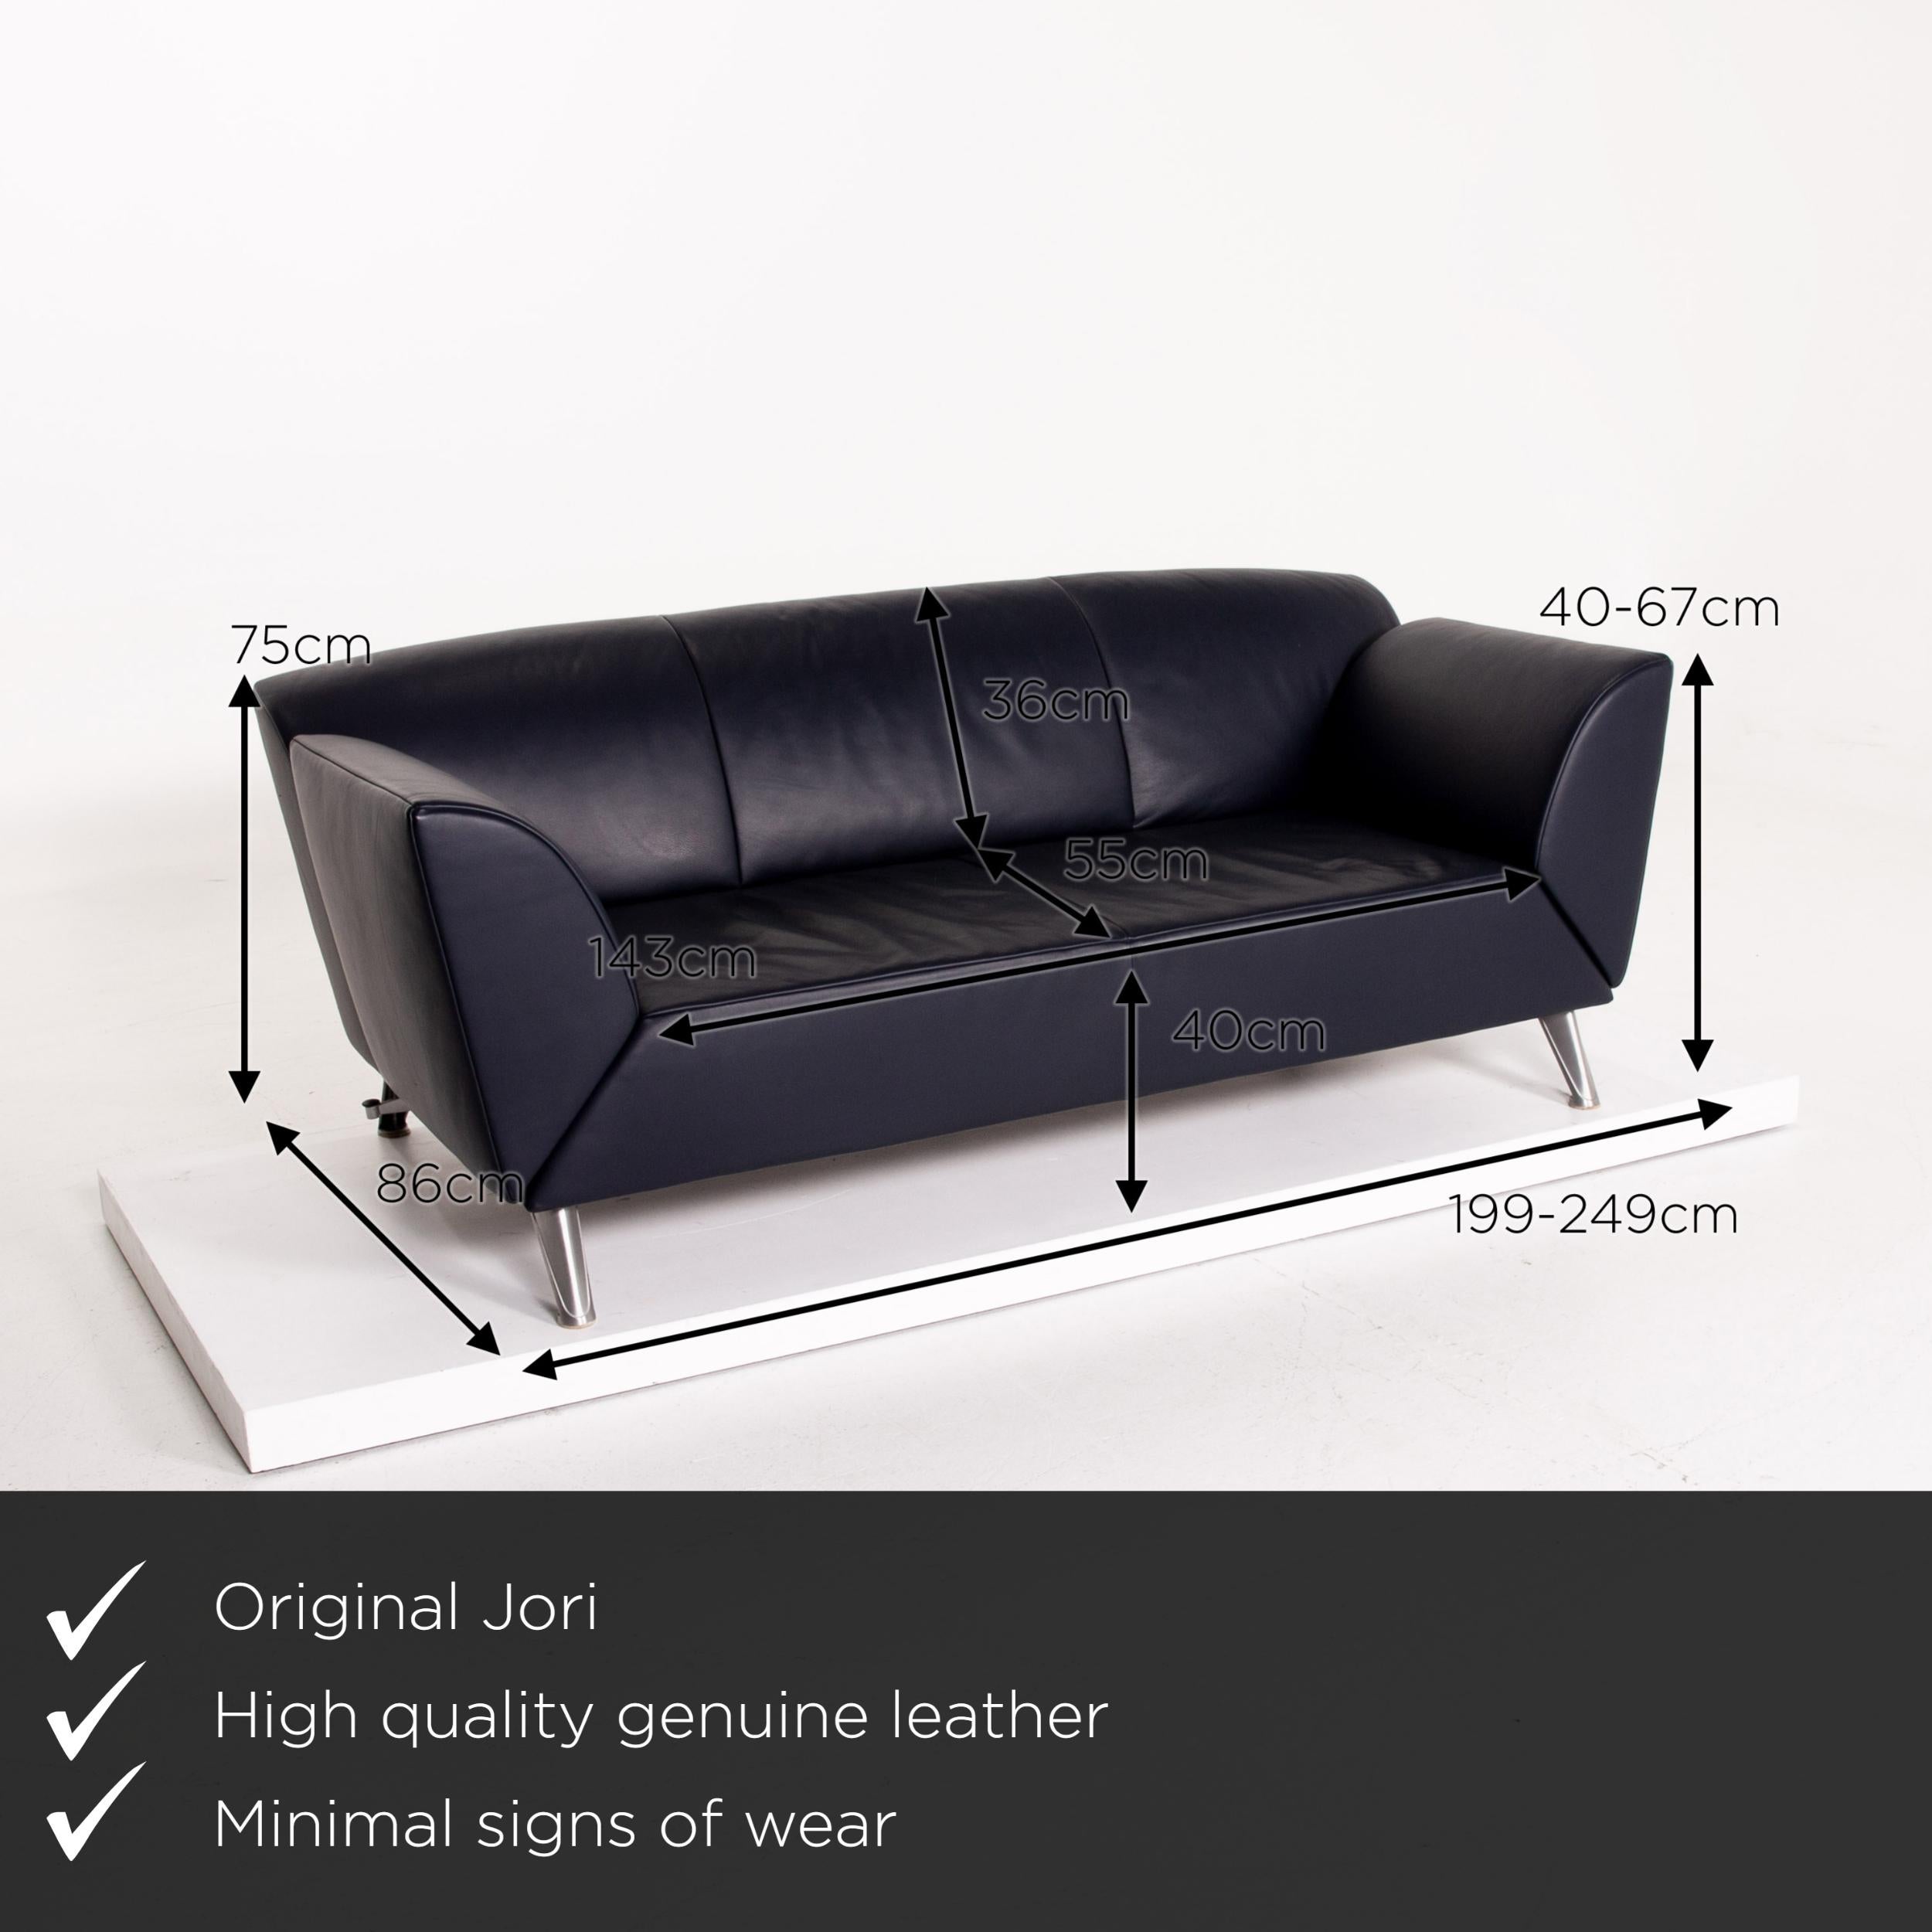 We present to you a JORI leather sofa dark blue blue three-seat function couch.
   
 

 Product measurements in centimeters:
 

Depth 86
Width 199
Height 75
Seat height 40
Rest height 40
Seat depth 55
Seat width 143
Back height 36.